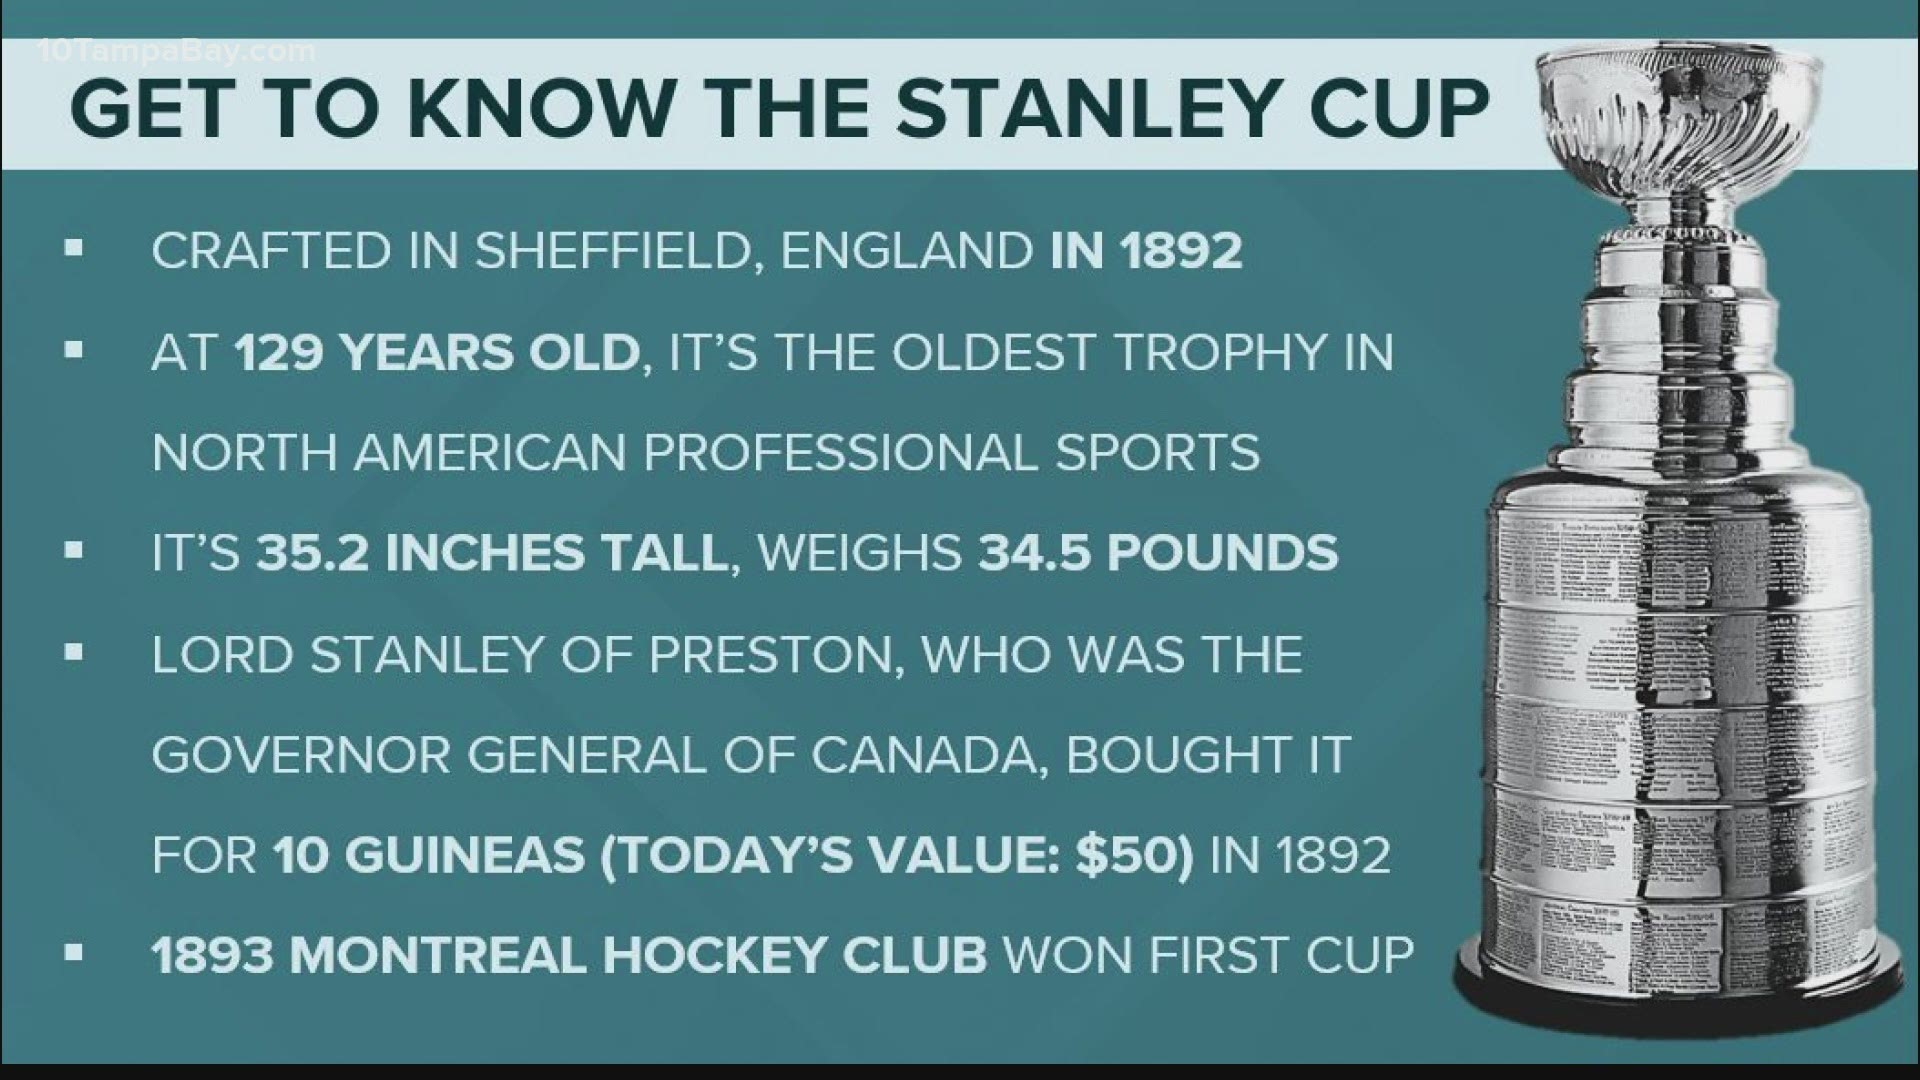 The most iconic sports trophy has a long legacy.